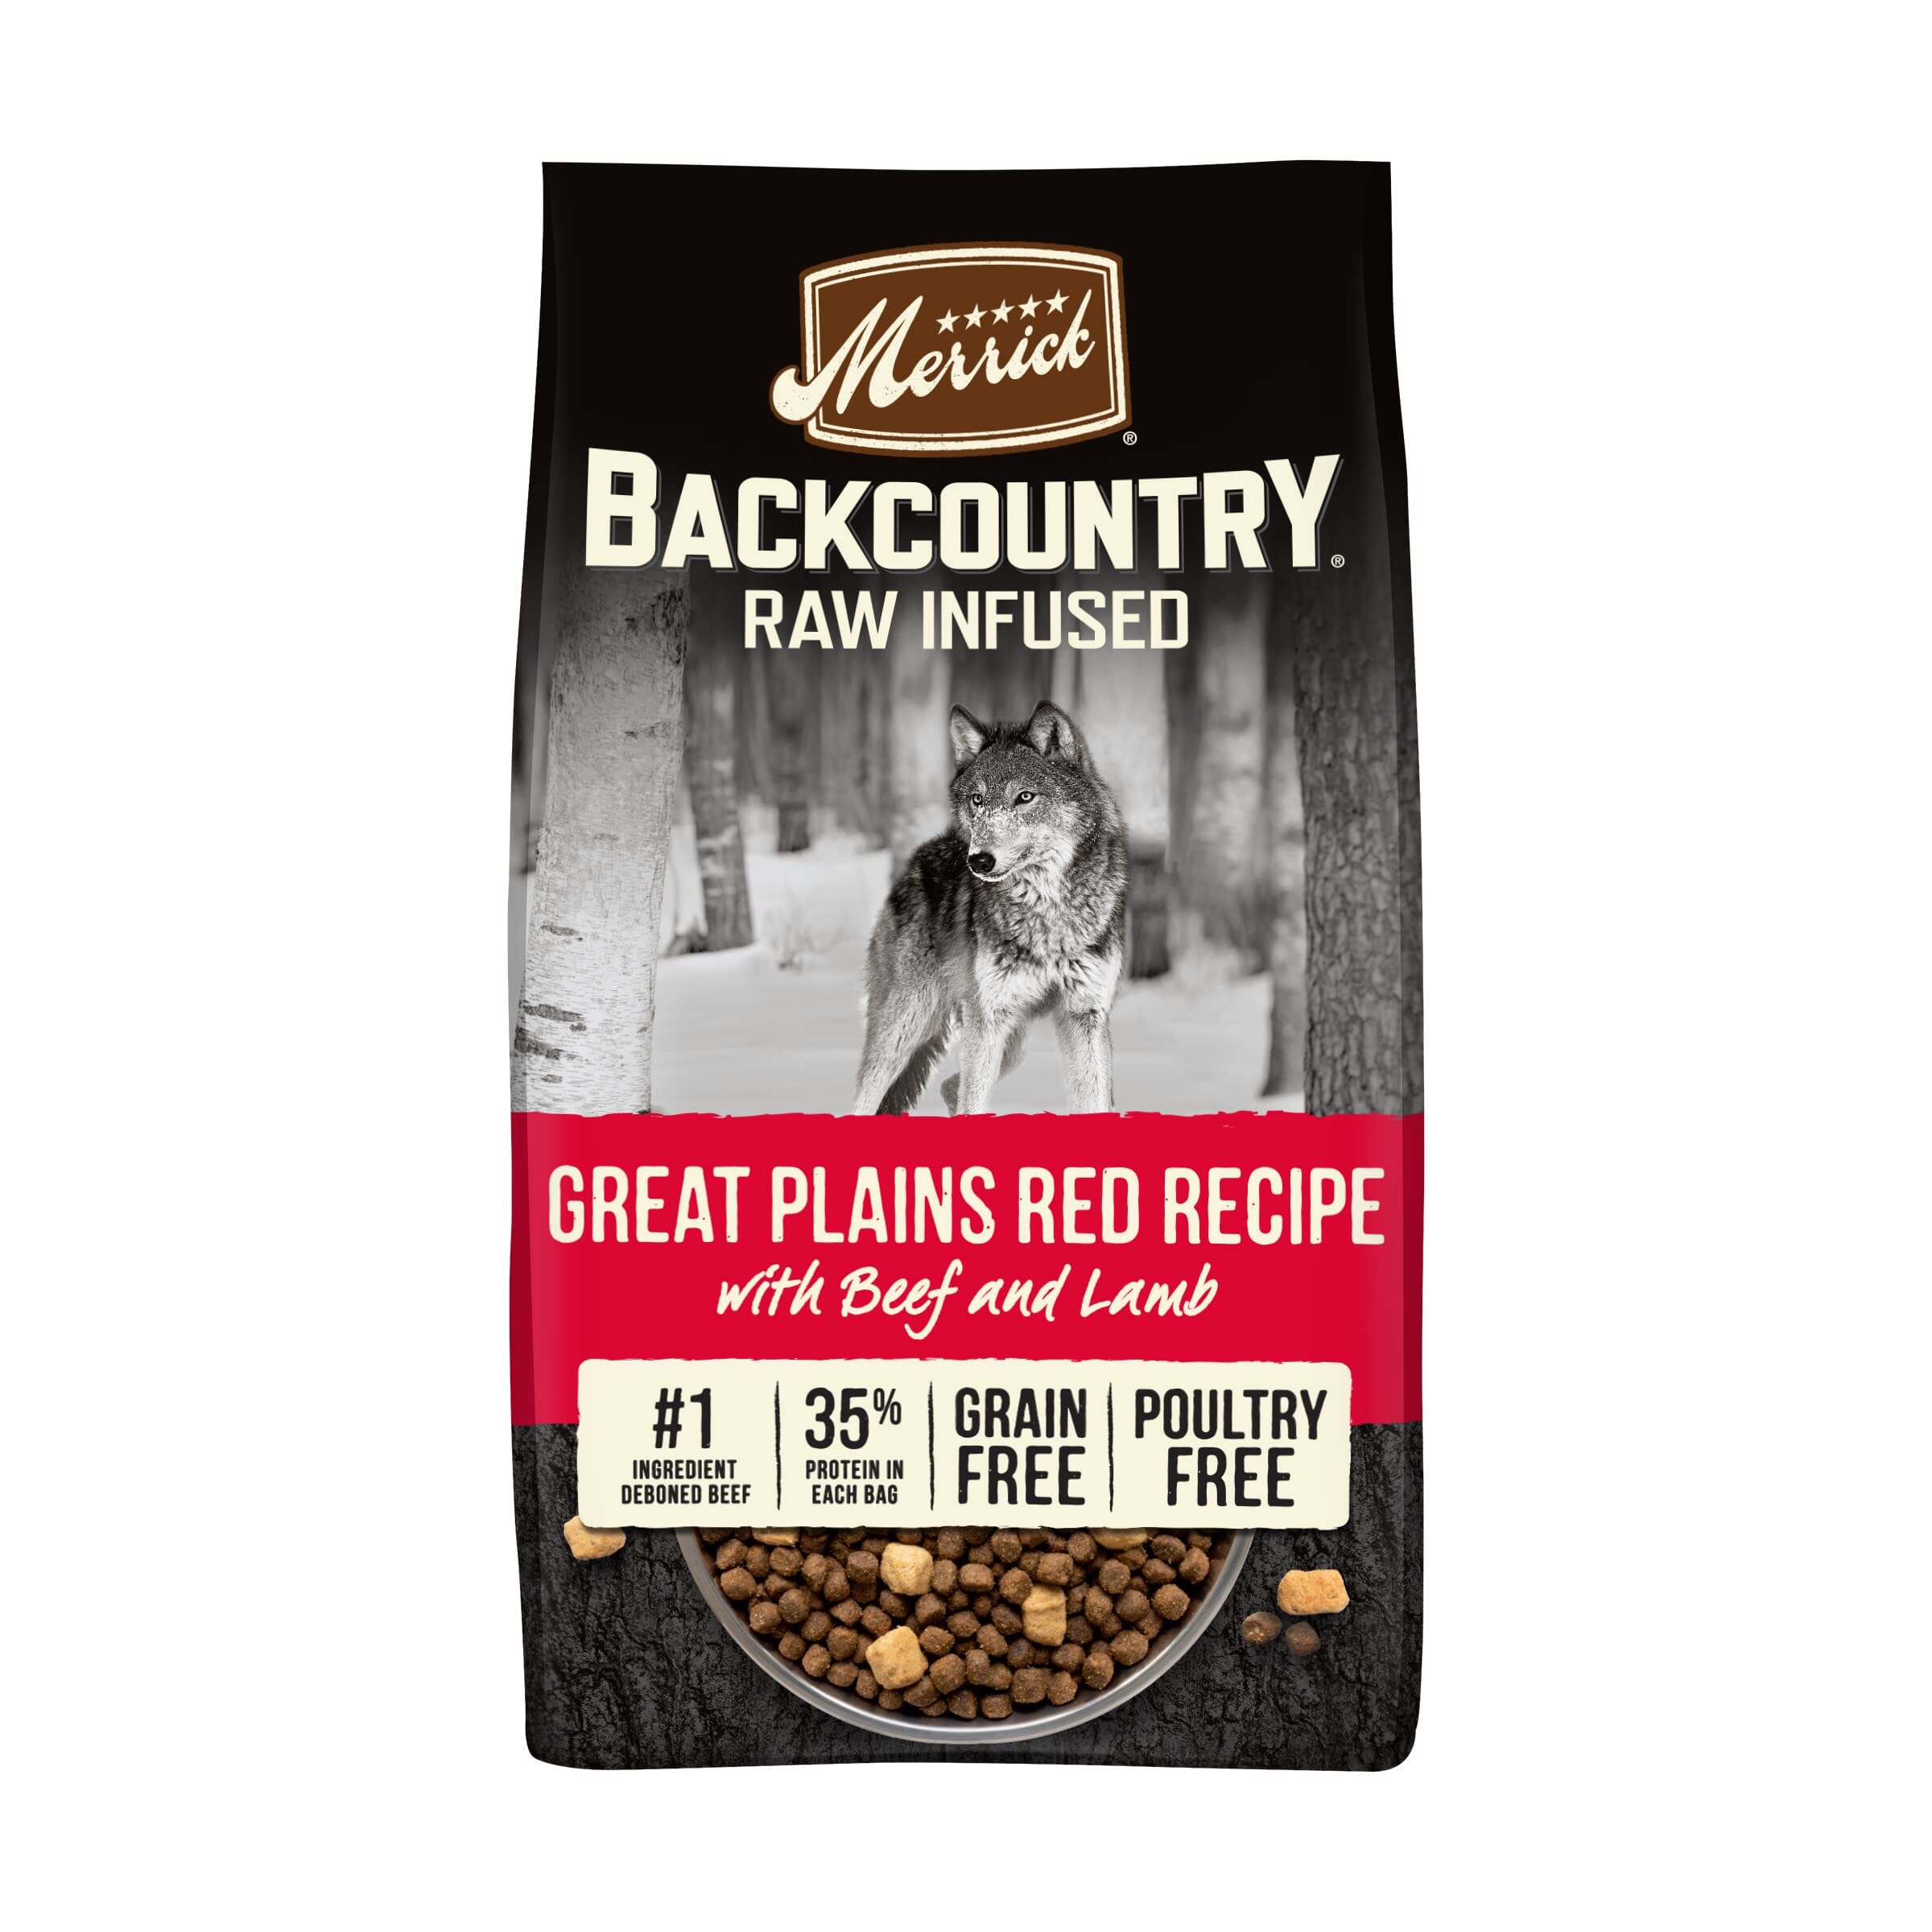 Merrick Backcountry Great Plains Grain-Free Raw-Infused Beef and Lamb Freeze-Fried Dog Food - 20 Lbs  